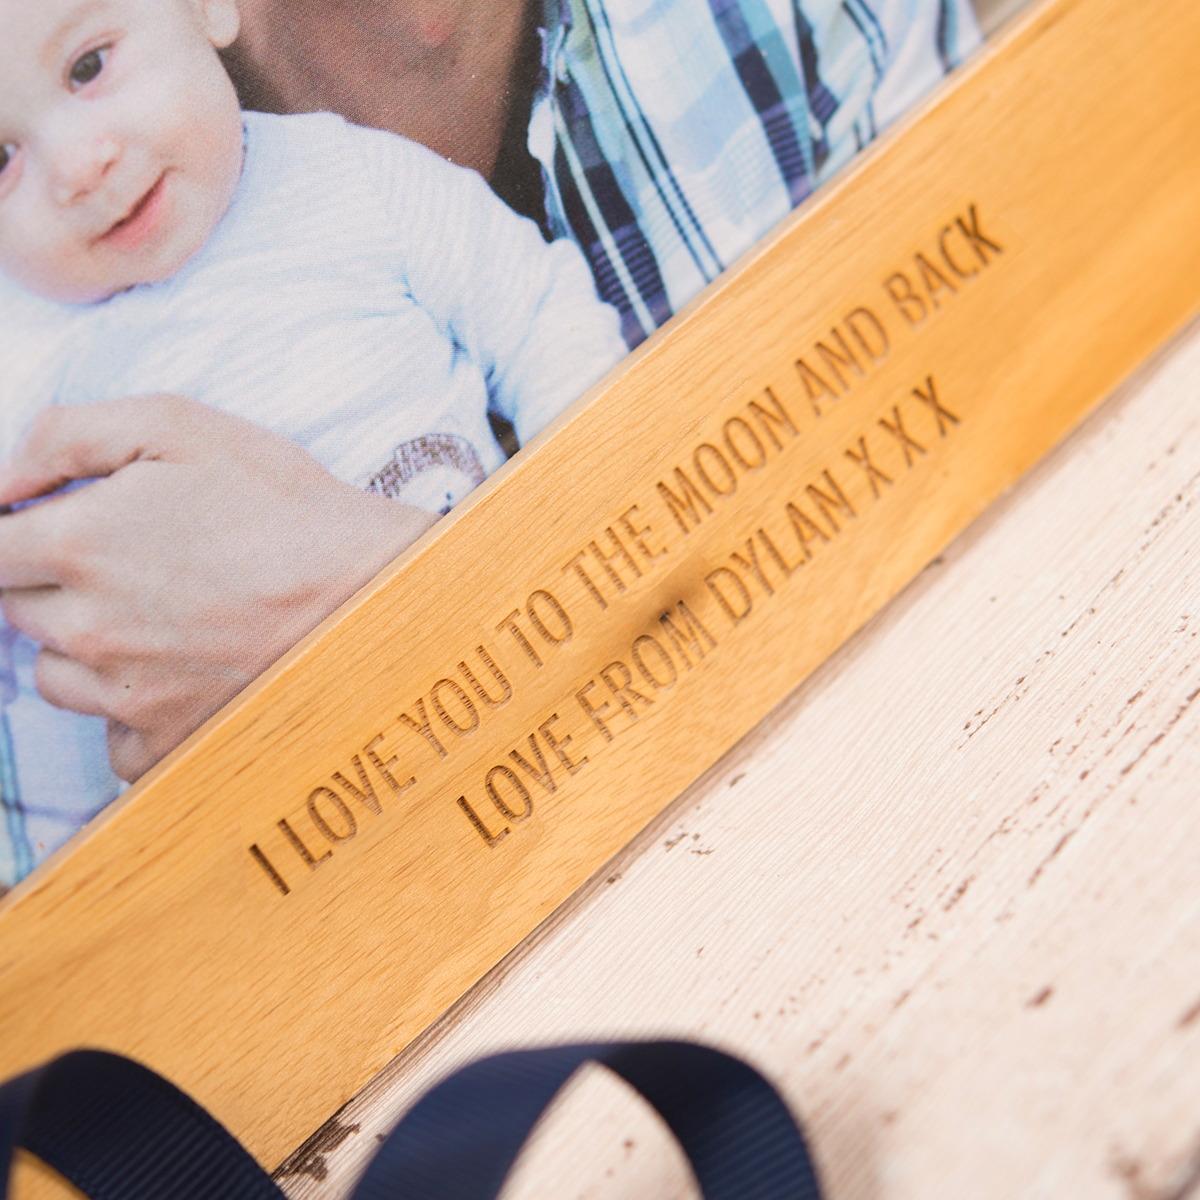 Personalised Engraved Wooden Picture Frame - Our First Father's Day